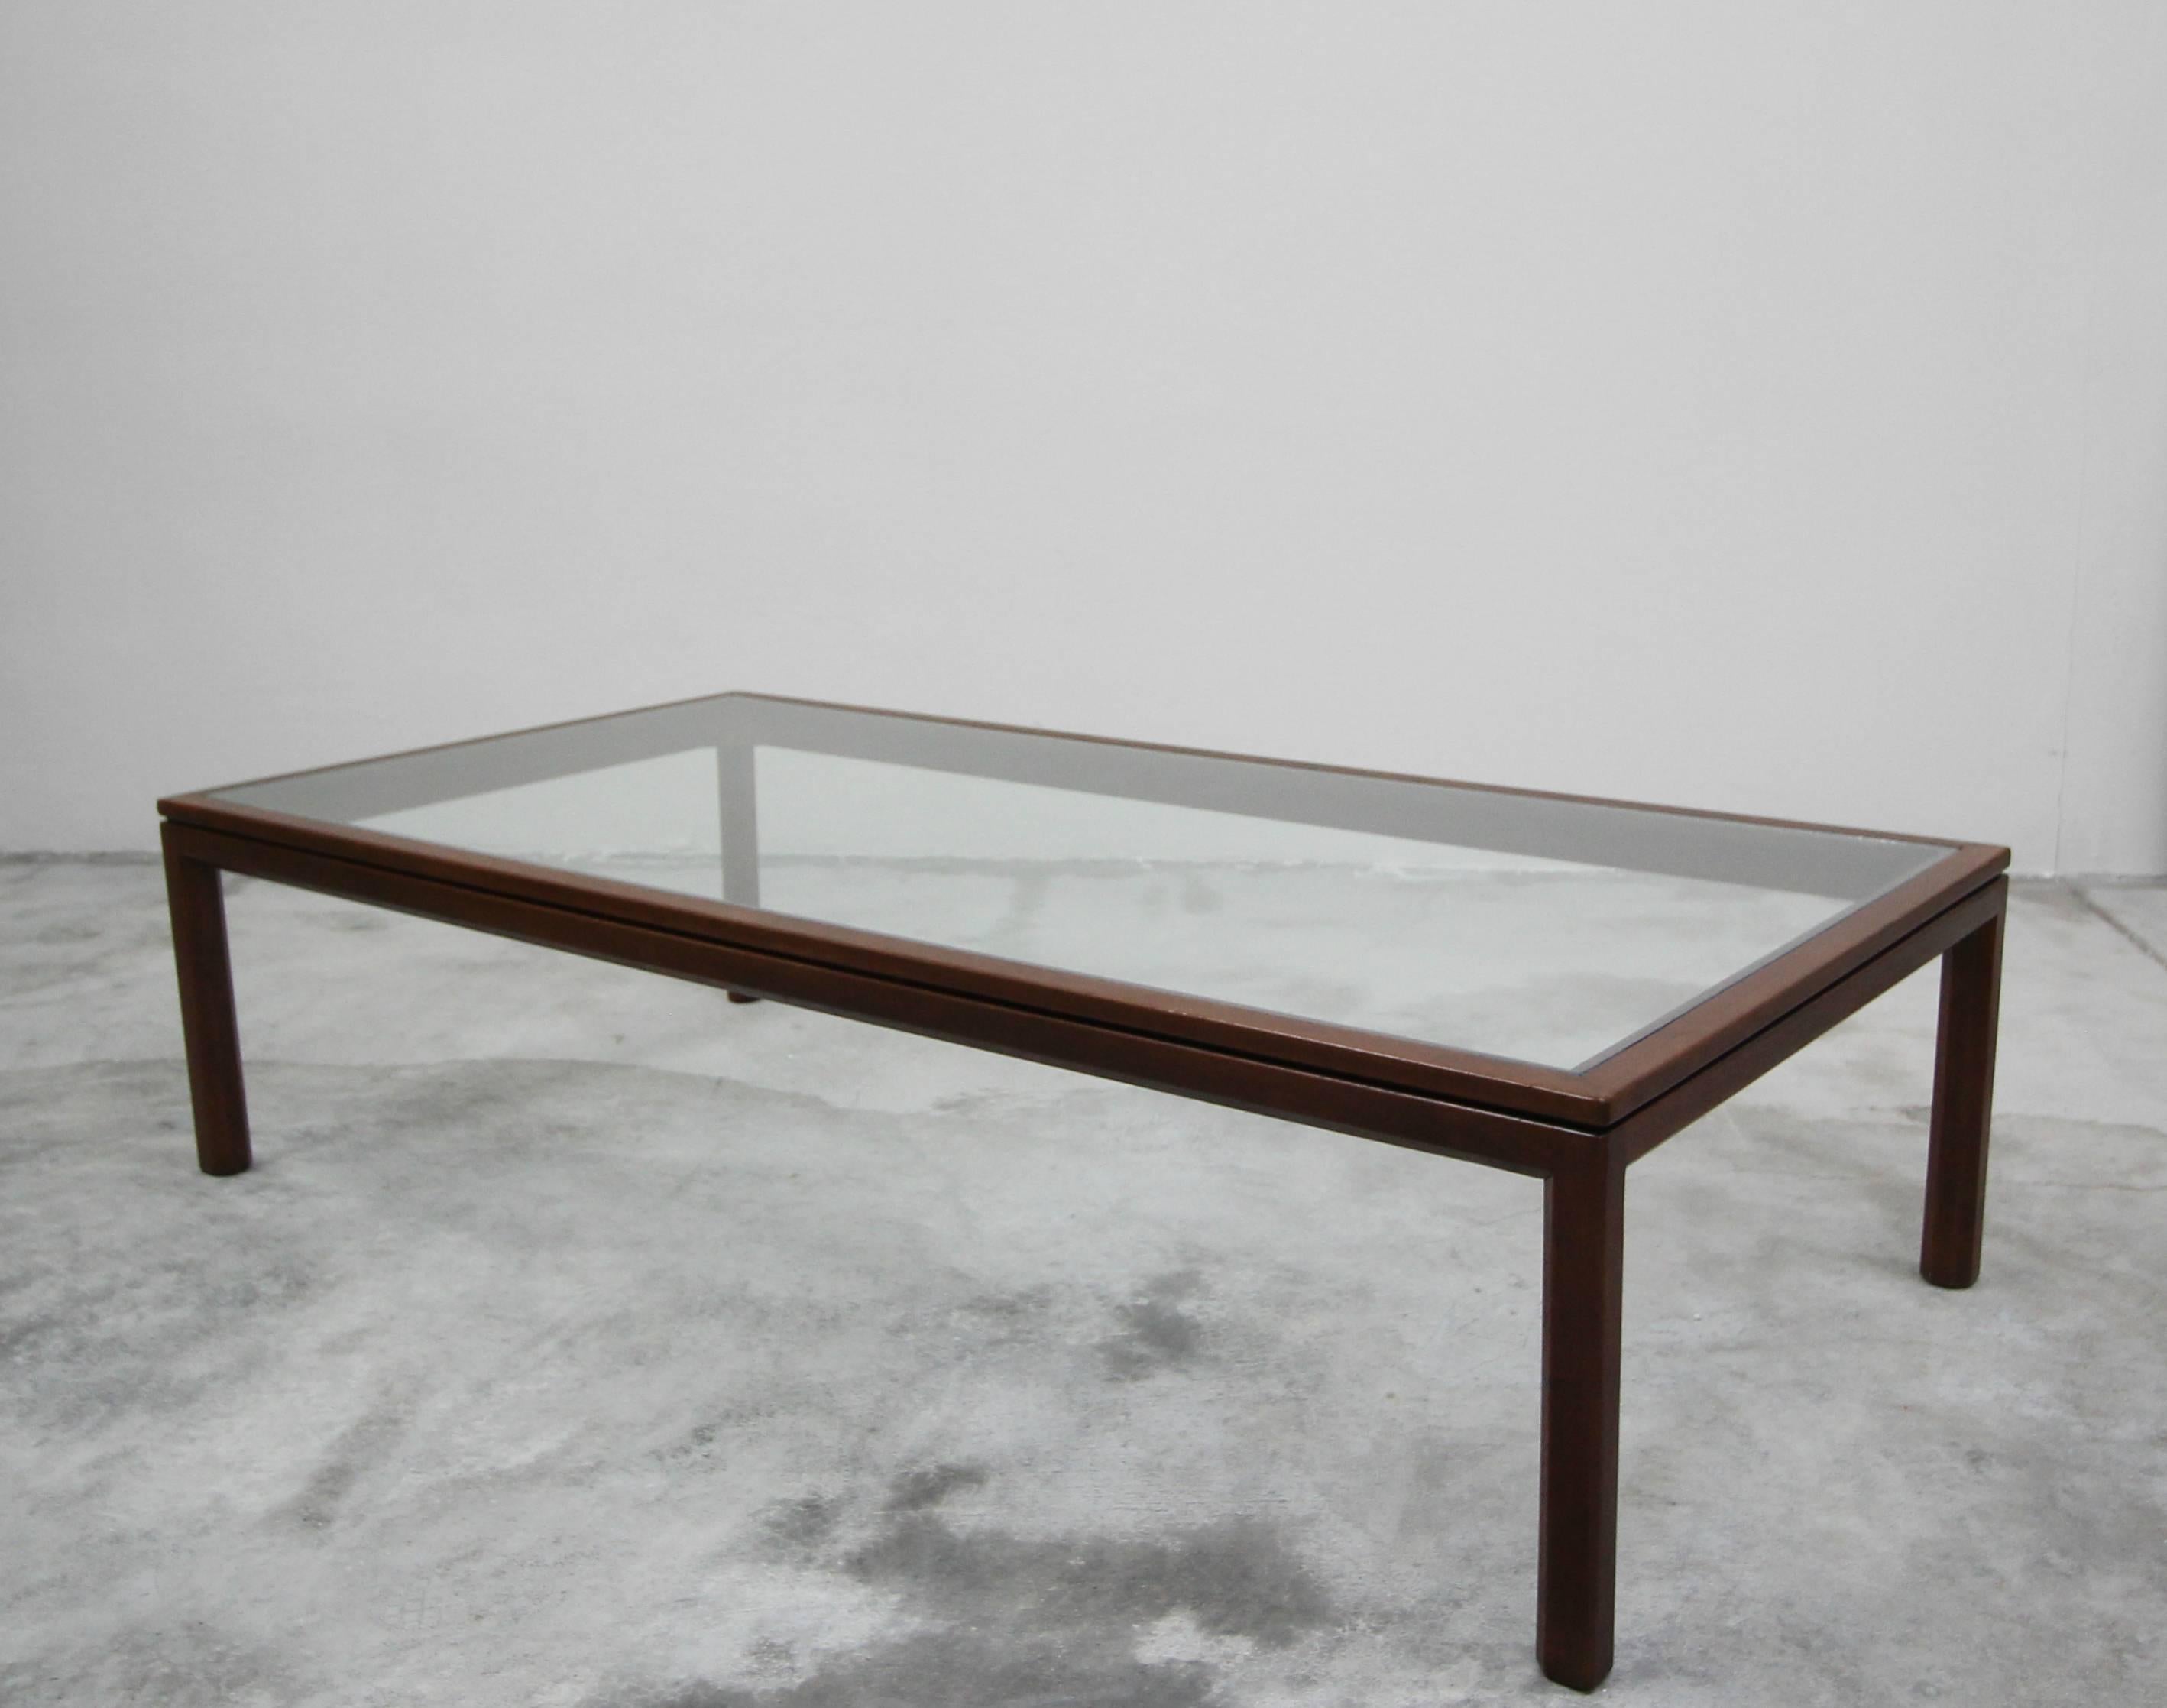 Simple. Beautiful. The perfect Minimalist coffee table. Perfect in any space.

Glass is brand new and the wood is in excellent condition.